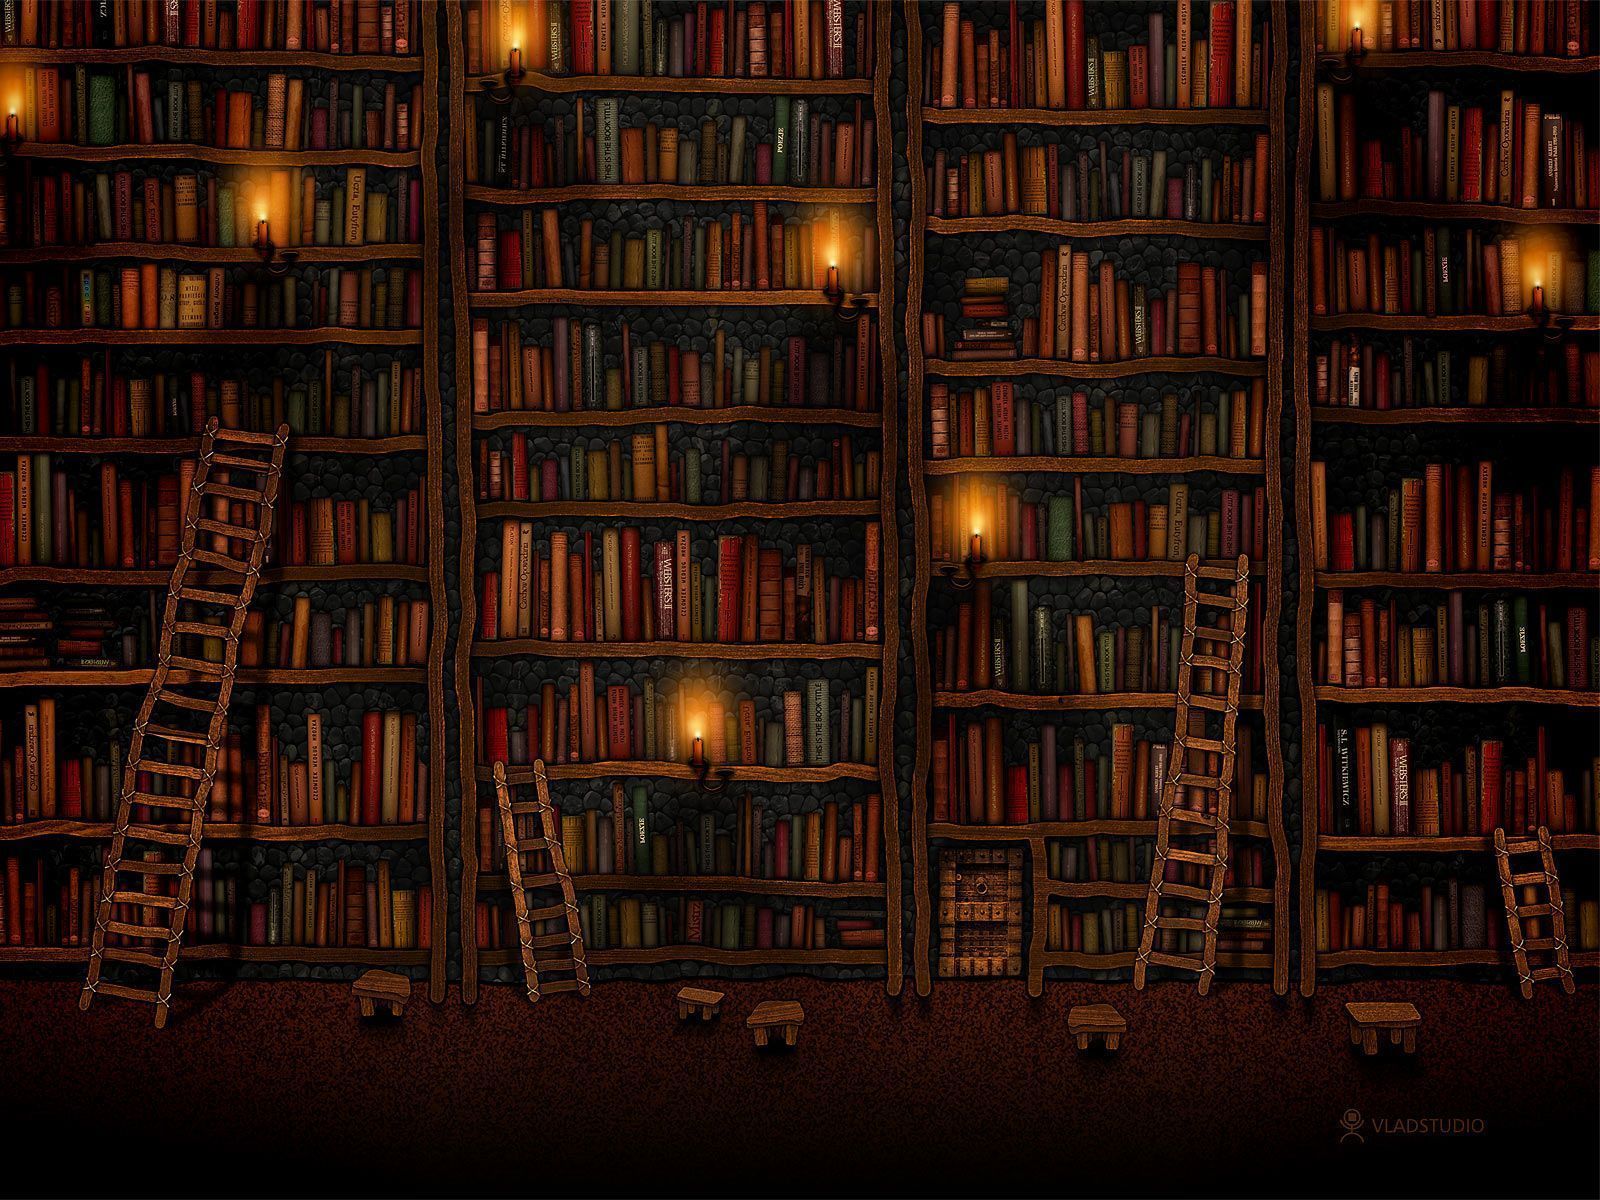 A large library with many books and ladders - Library, bookshelf